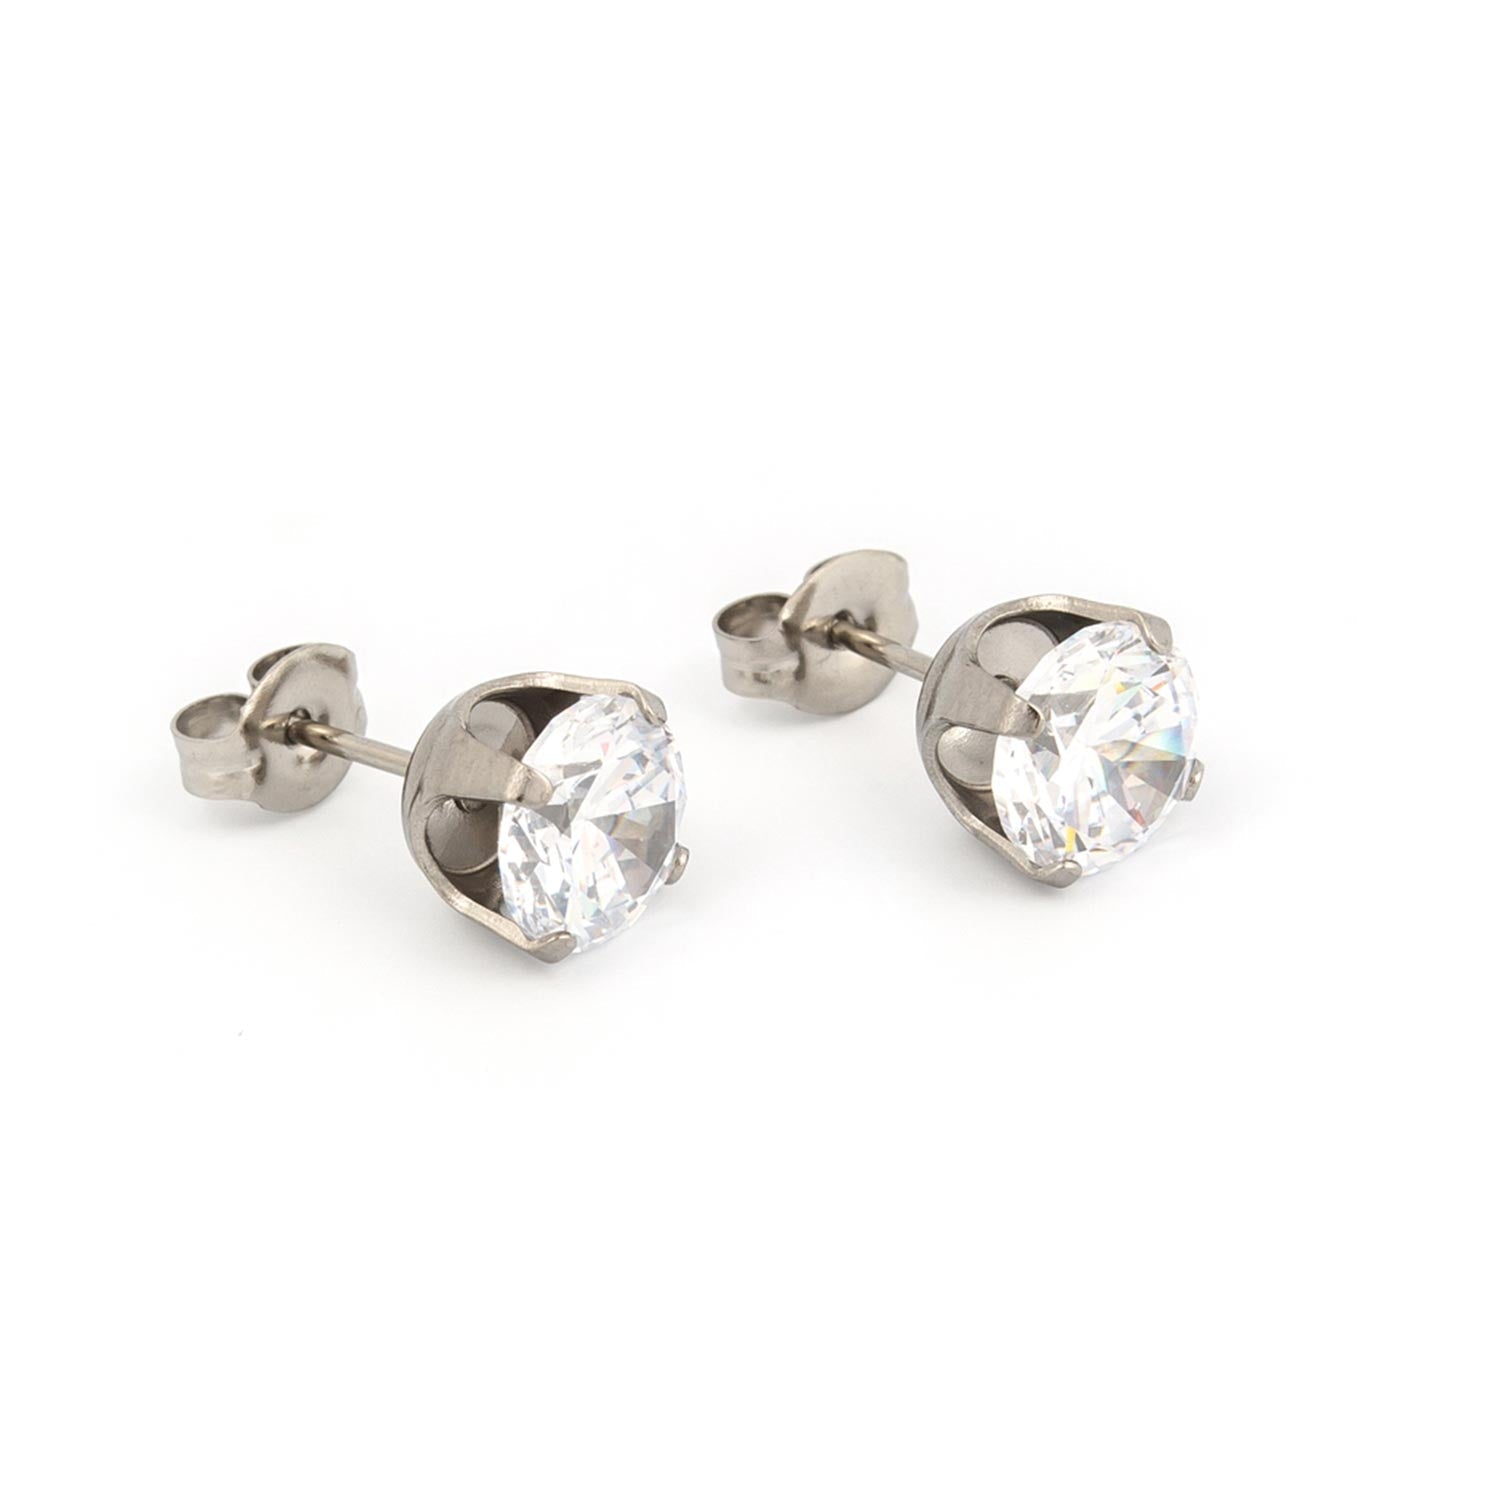 7MM Cubic Zirconia Allergy Free Stainless Steel Ear Studs | Ideal for everyday wear